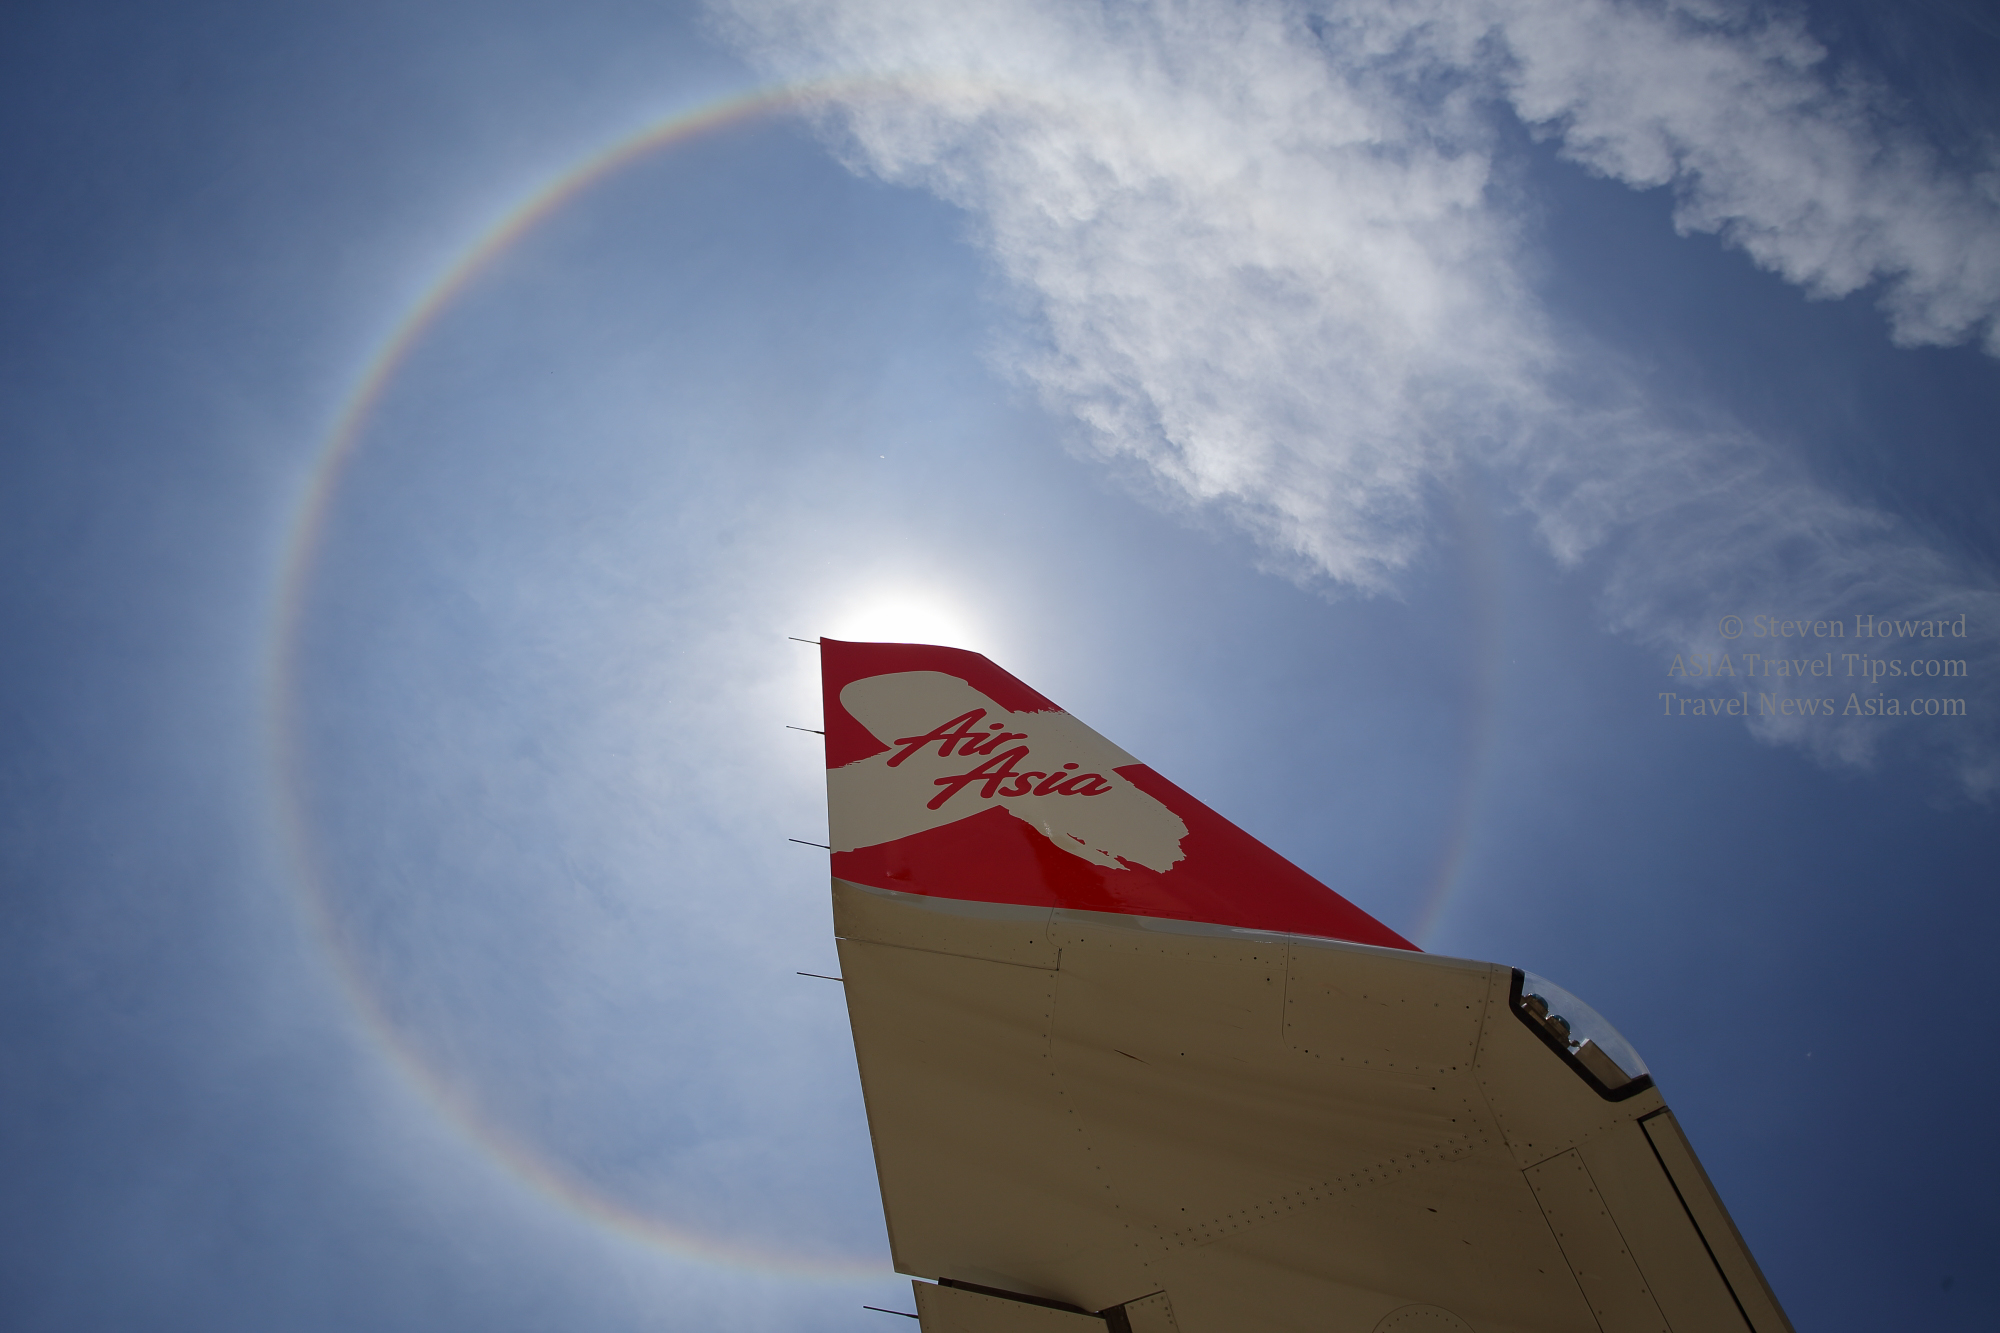 Strange effect in the very sunny sky over Don Mueang Airport in Bangkok on 14 May 2014 while filming Thai AirAsia X's Airbus A330-300 Aircraft - HD Video Tour. Click to enlarge.